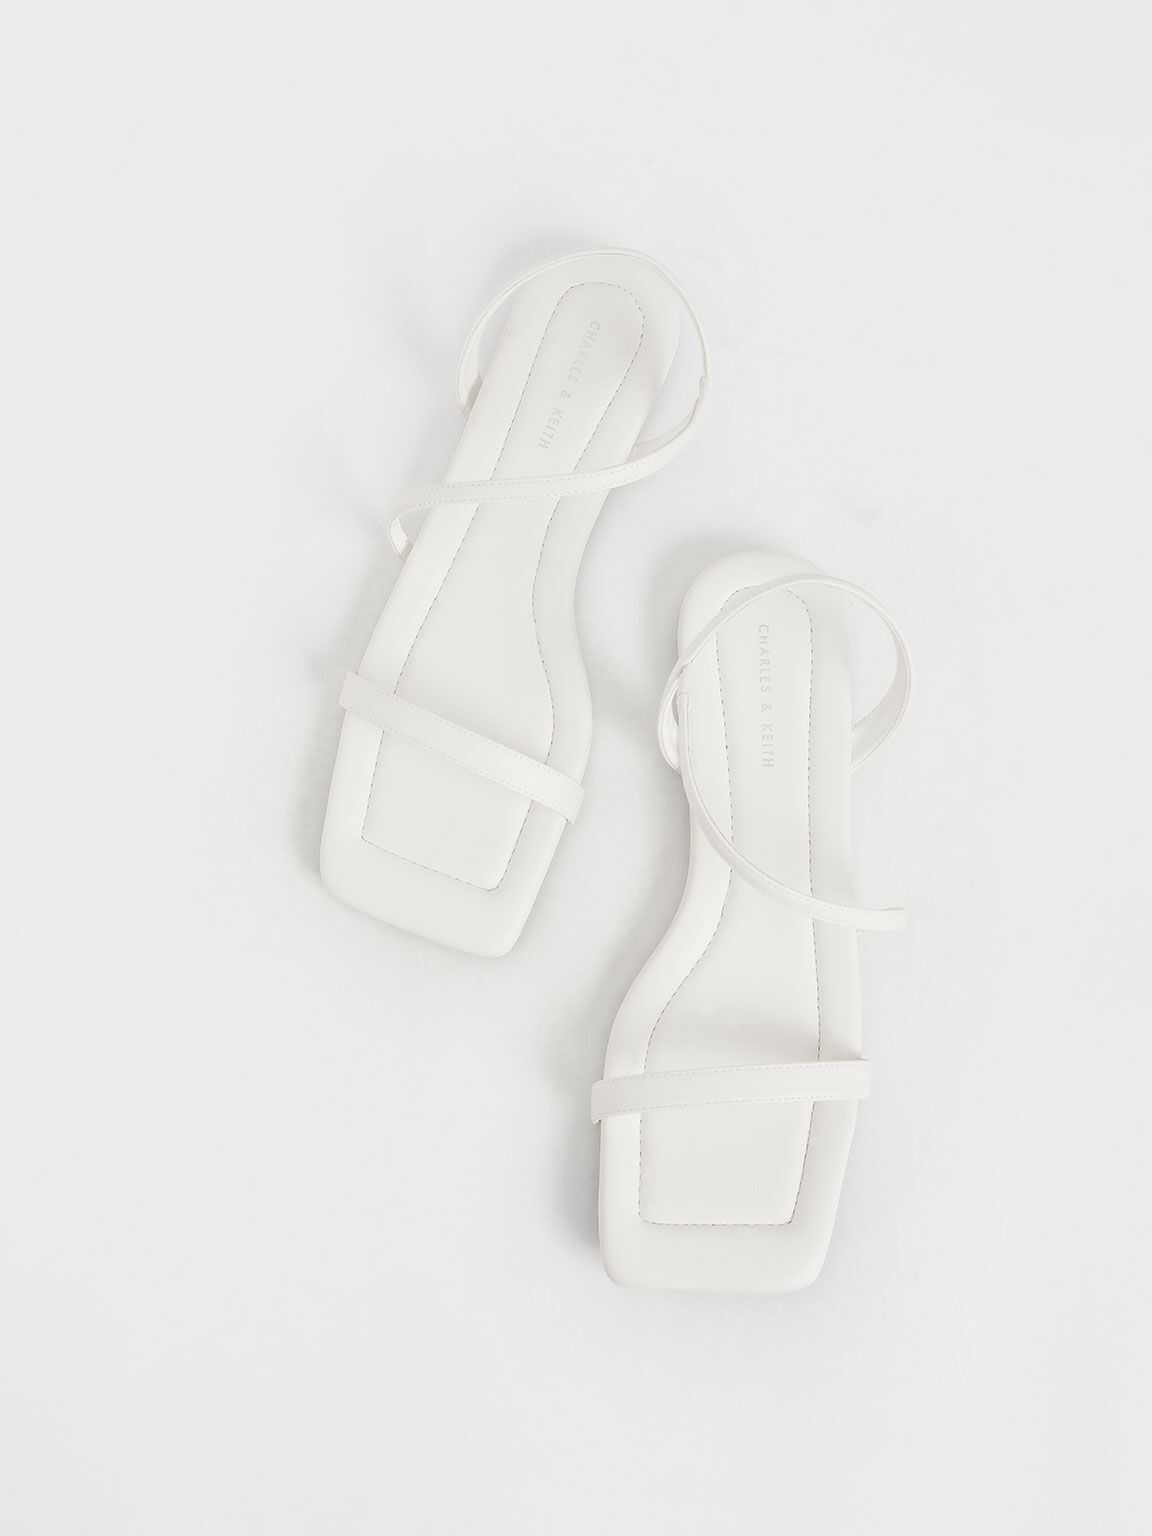 Strappy Flat Sandals, White, hi-res